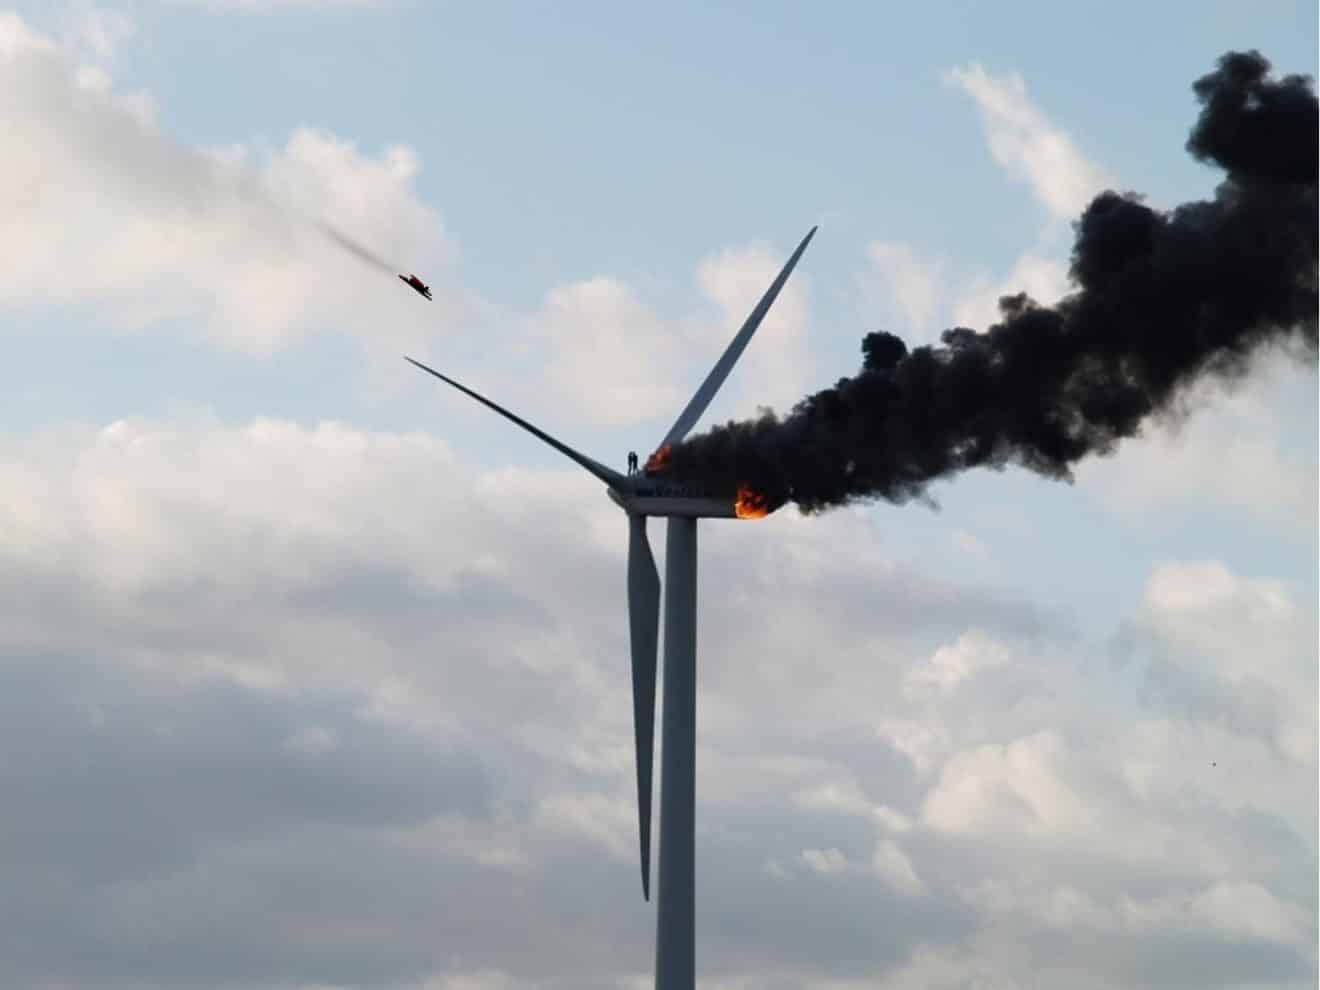 German Energy Company Takes Down Windmills To Make Room For Coal Mining